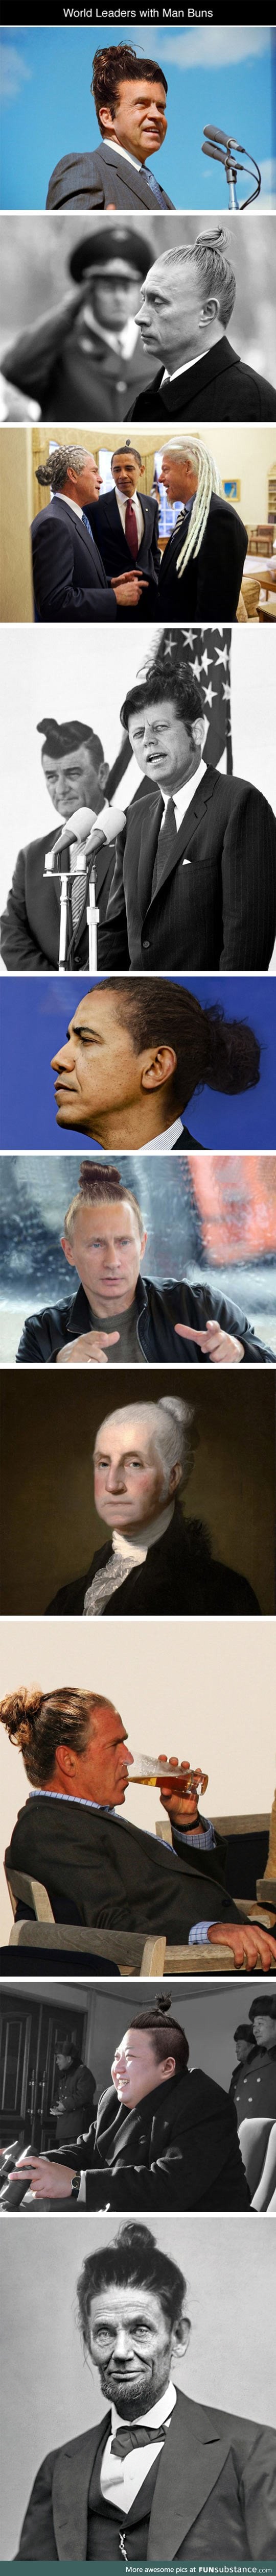 Leaders with man buns